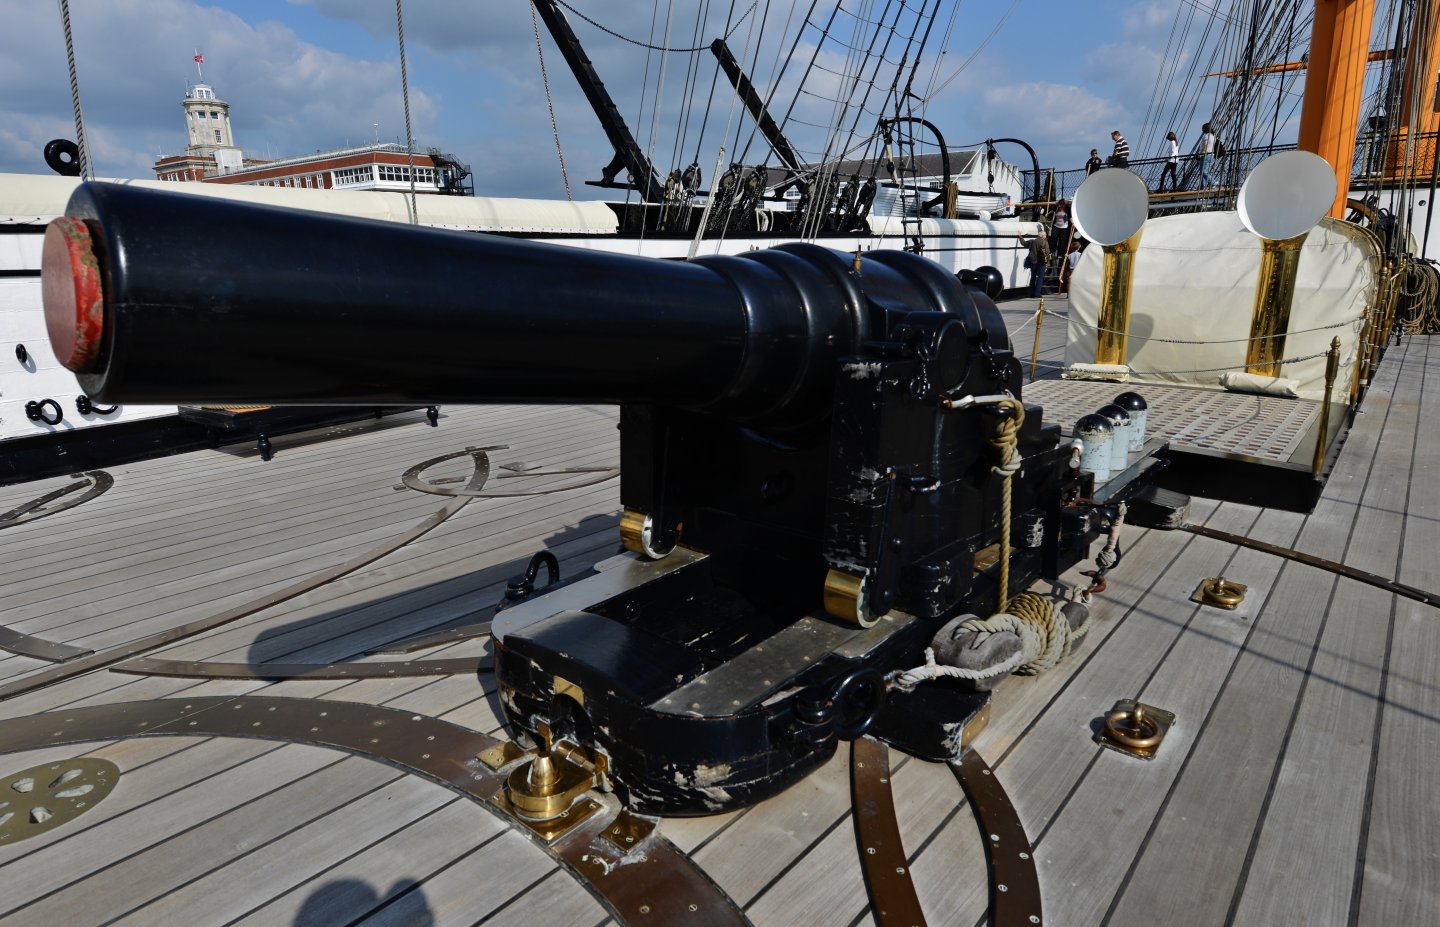 https://upload.wikimedia.org/wikipedia/commons/a/ae/HMS_Warrior_1860_Stern_chaser_gun_with_its_tracks_for_manoevuring_in_any_direction.JPG